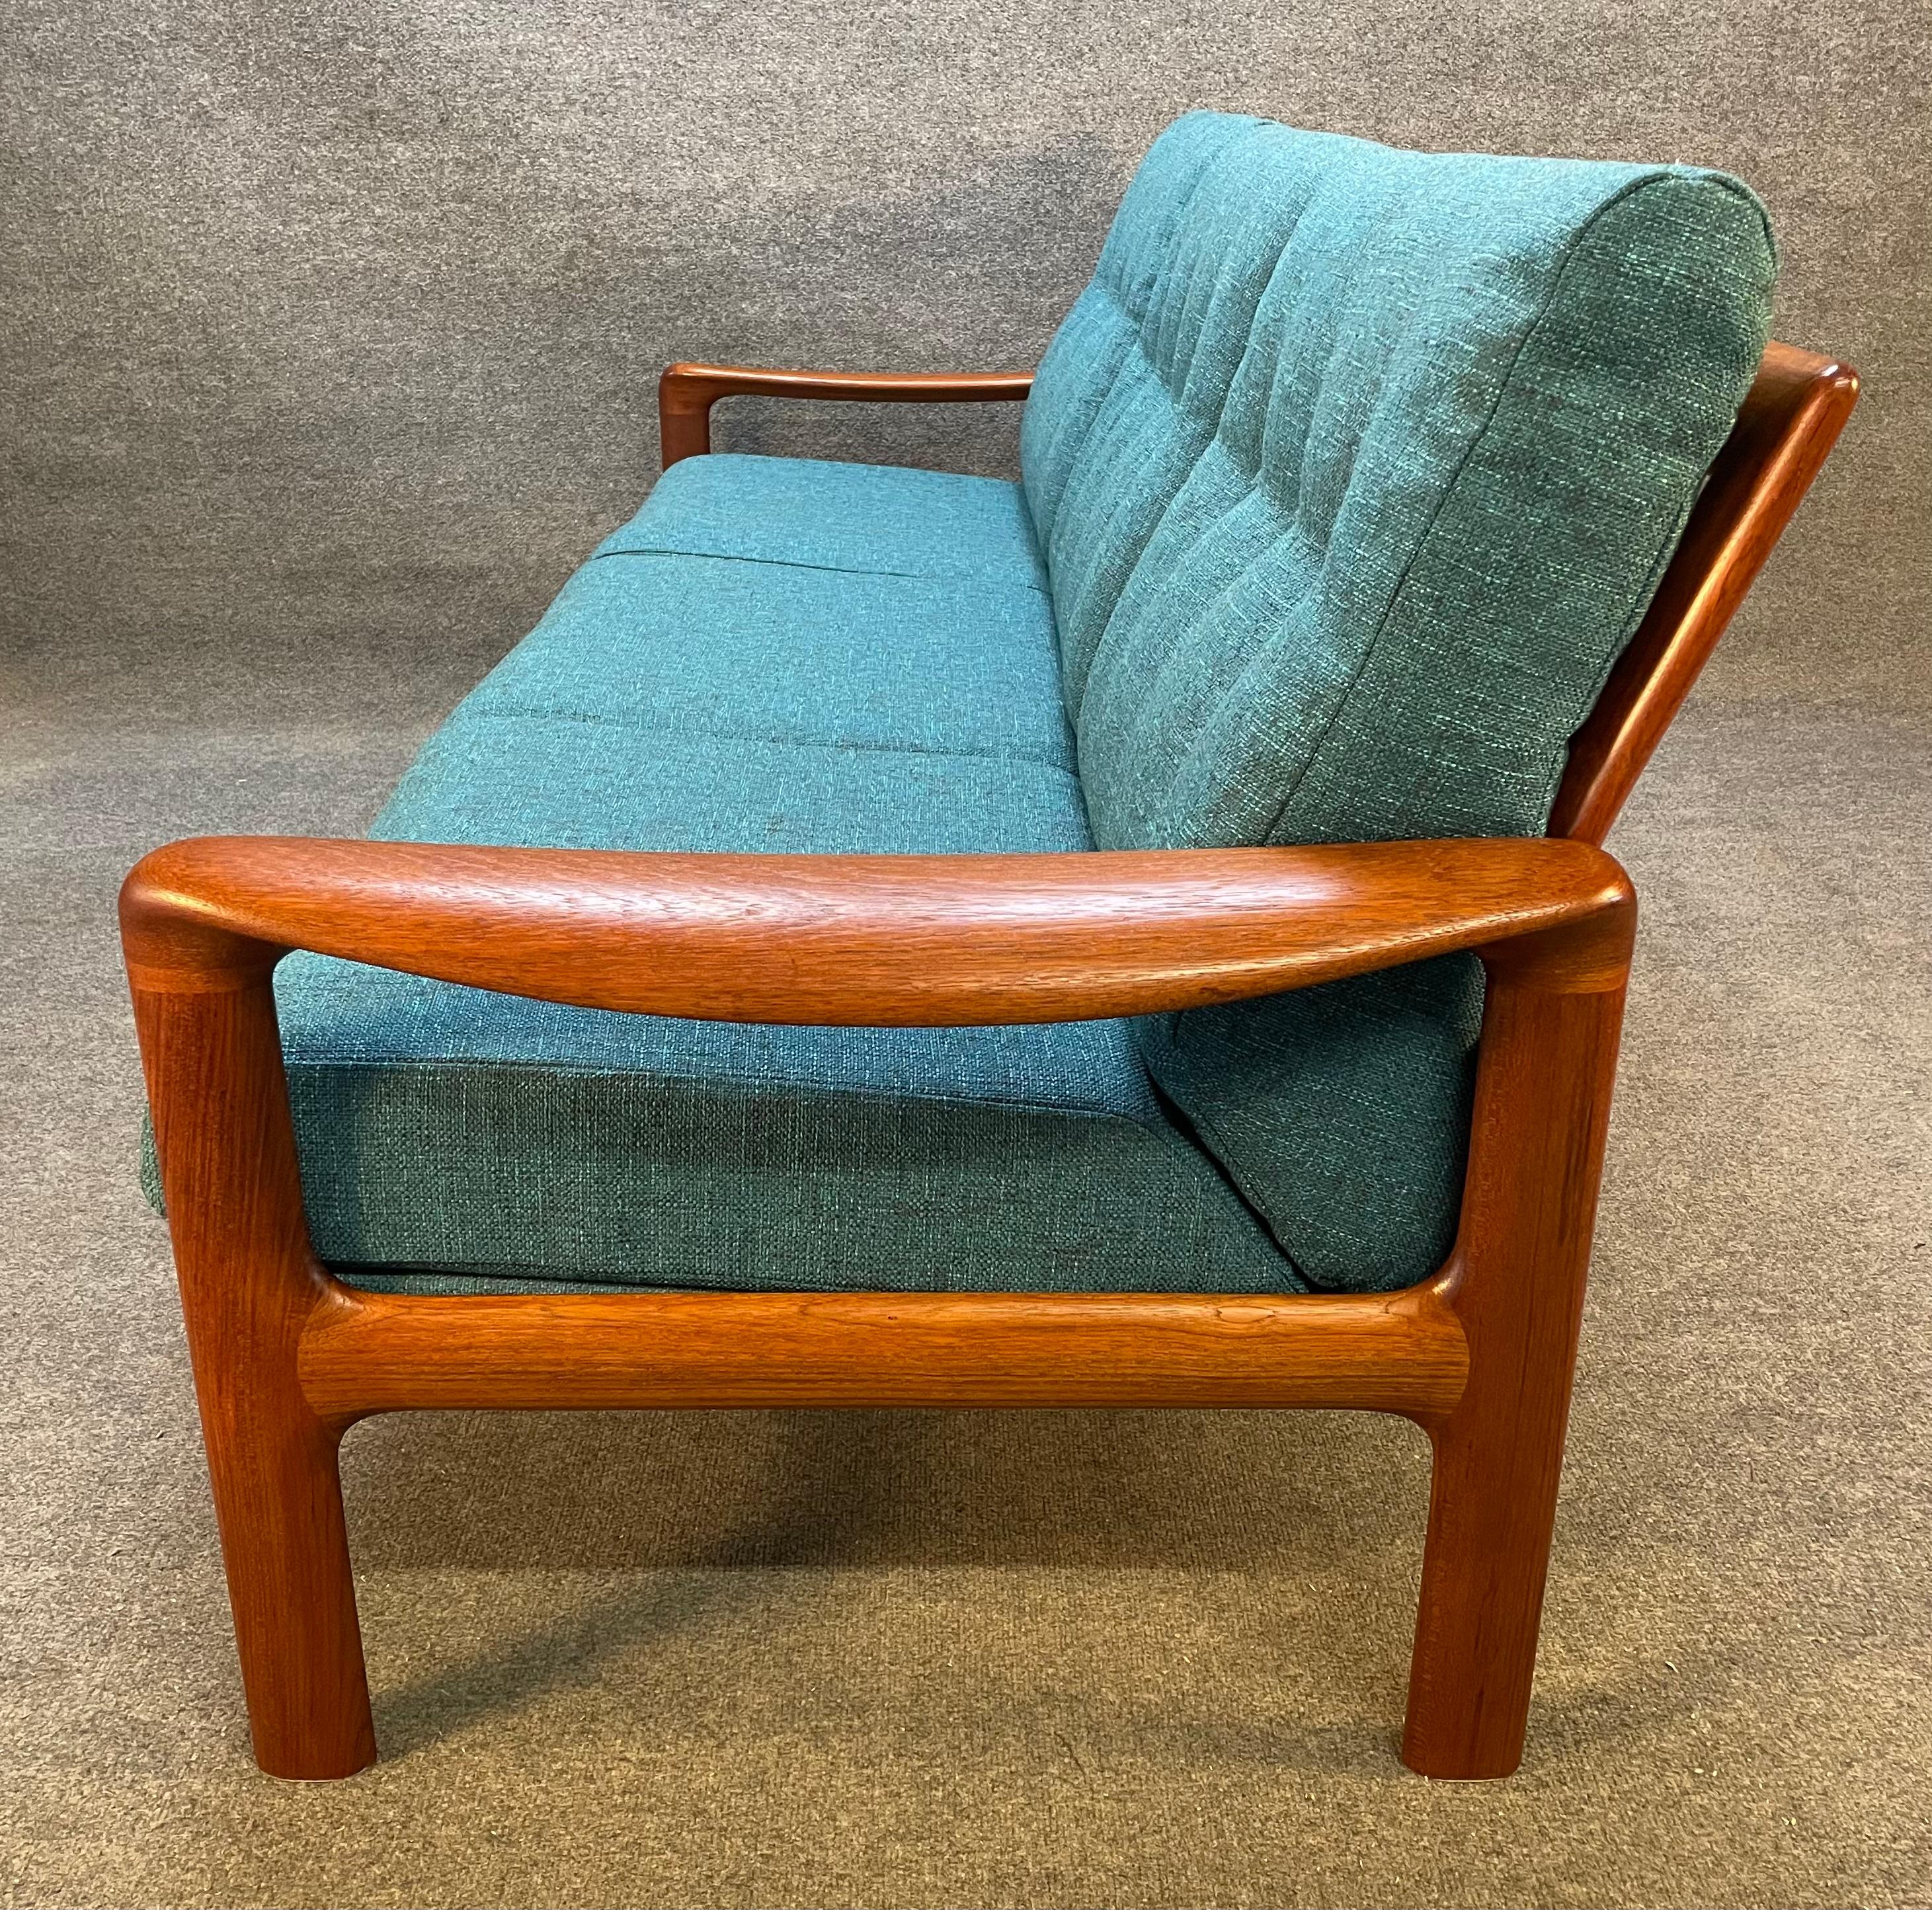 Here is a beautiful scandinavian modern 3 seaters sofa in teak wood manufactured by Komfort in Denmark in the late 1960's.
This comfortable couch, recently imported from Denmark to California before its refinishing, features a solid teak frame with